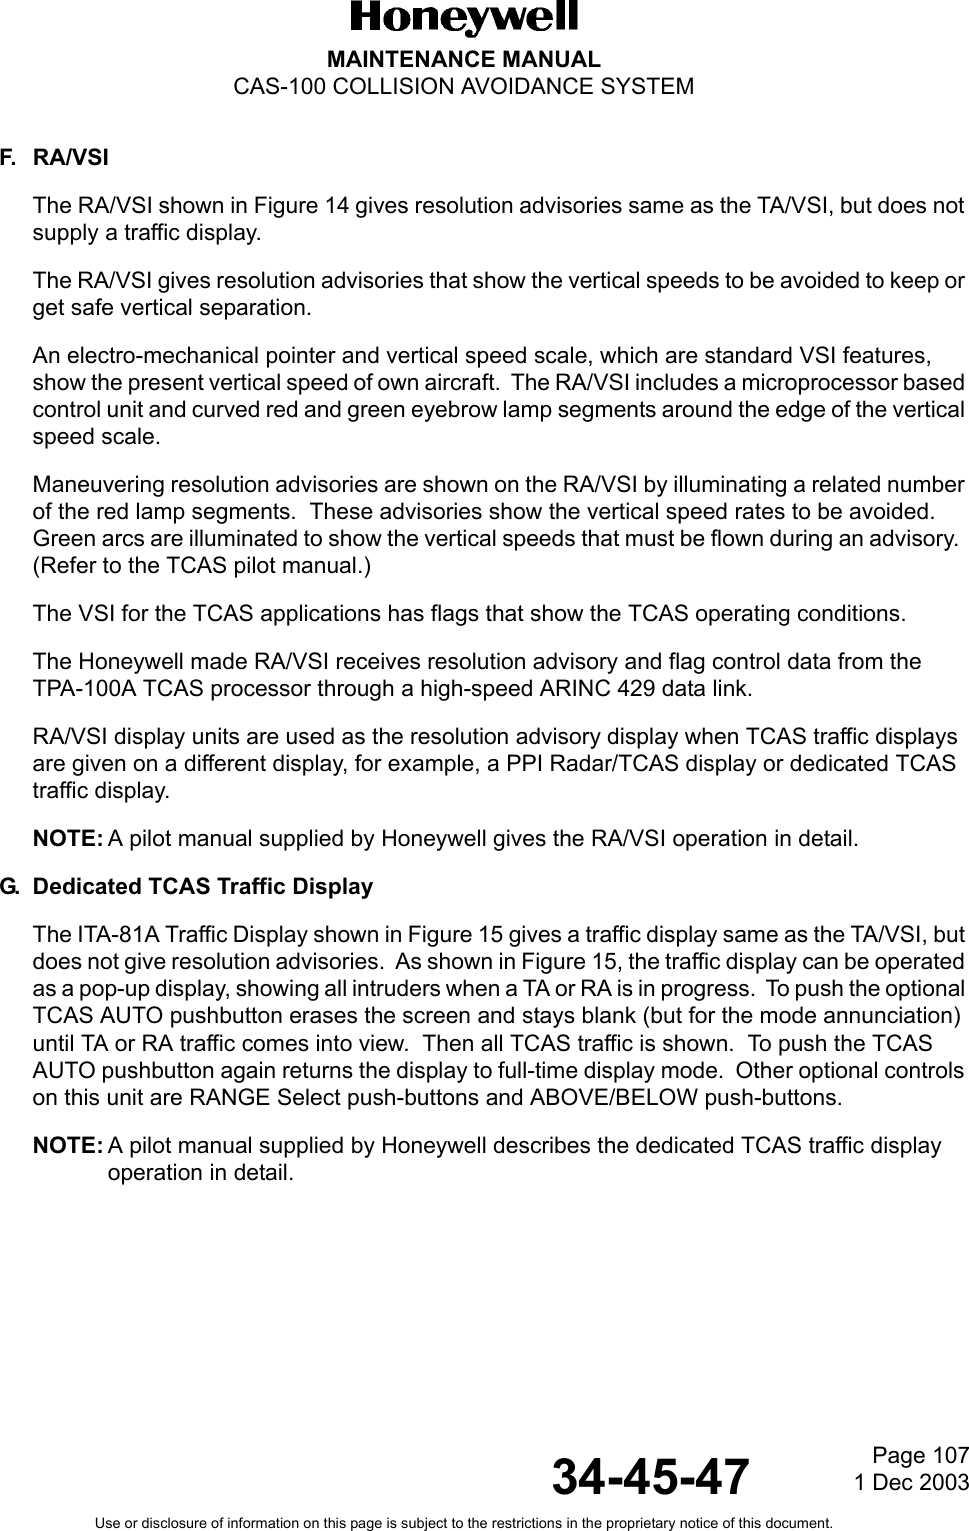 Page 1071 Dec 200334-45-47MAINTENANCE MANUALCAS-100 COLLISION AVOIDANCE SYSTEMUse or disclosure of information on this page is subject to the restrictions in the proprietary notice of this document.F. RA/VSIThe RA/VSI shown in Figure 14 gives resolution advisories same as the TA/VSI, but does not supply a traffic display.The RA/VSI gives resolution advisories that show the vertical speeds to be avoided to keep or get safe vertical separation.An electro-mechanical pointer and vertical speed scale, which are standard VSI features, show the present vertical speed of own aircraft.  The RA/VSI includes a microprocessor based control unit and curved red and green eyebrow lamp segments around the edge of the vertical speed scale. Maneuvering resolution advisories are shown on the RA/VSI by illuminating a related number of the red lamp segments.  These advisories show the vertical speed rates to be avoided.  Green arcs are illuminated to show the vertical speeds that must be flown during an advisory.  (Refer to the TCAS pilot manual.)The VSI for the TCAS applications has flags that show the TCAS operating conditions.The Honeywell made RA/VSI receives resolution advisory and flag control data from the TPA-100A TCAS processor through a high-speed ARINC 429 data link.RA/VSI display units are used as the resolution advisory display when TCAS traffic displays are given on a different display, for example, a PPI Radar/TCAS display or dedicated TCAS traffic display.NOTE: A pilot manual supplied by Honeywell gives the RA/VSI operation in detail.G. Dedicated TCAS Traffic DisplayThe ITA-81A Traffic Display shown in Figure 15 gives a traffic display same as the TA/VSI, but does not give resolution advisories.  As shown in Figure 15, the traffic display can be operated as a pop-up display, showing all intruders when a TA or RA is in progress.  To push the optional TCAS AUTO pushbutton erases the screen and stays blank (but for the mode annunciation) until TA or RA traffic comes into view.  Then all TCAS traffic is shown.  To push the TCAS AUTO pushbutton again returns the display to full-time display mode.  Other optional controls on this unit are RANGE Select push-buttons and ABOVE/BELOW push-buttons.NOTE: A pilot manual supplied by Honeywell describes the dedicated TCAS traffic display operation in detail.